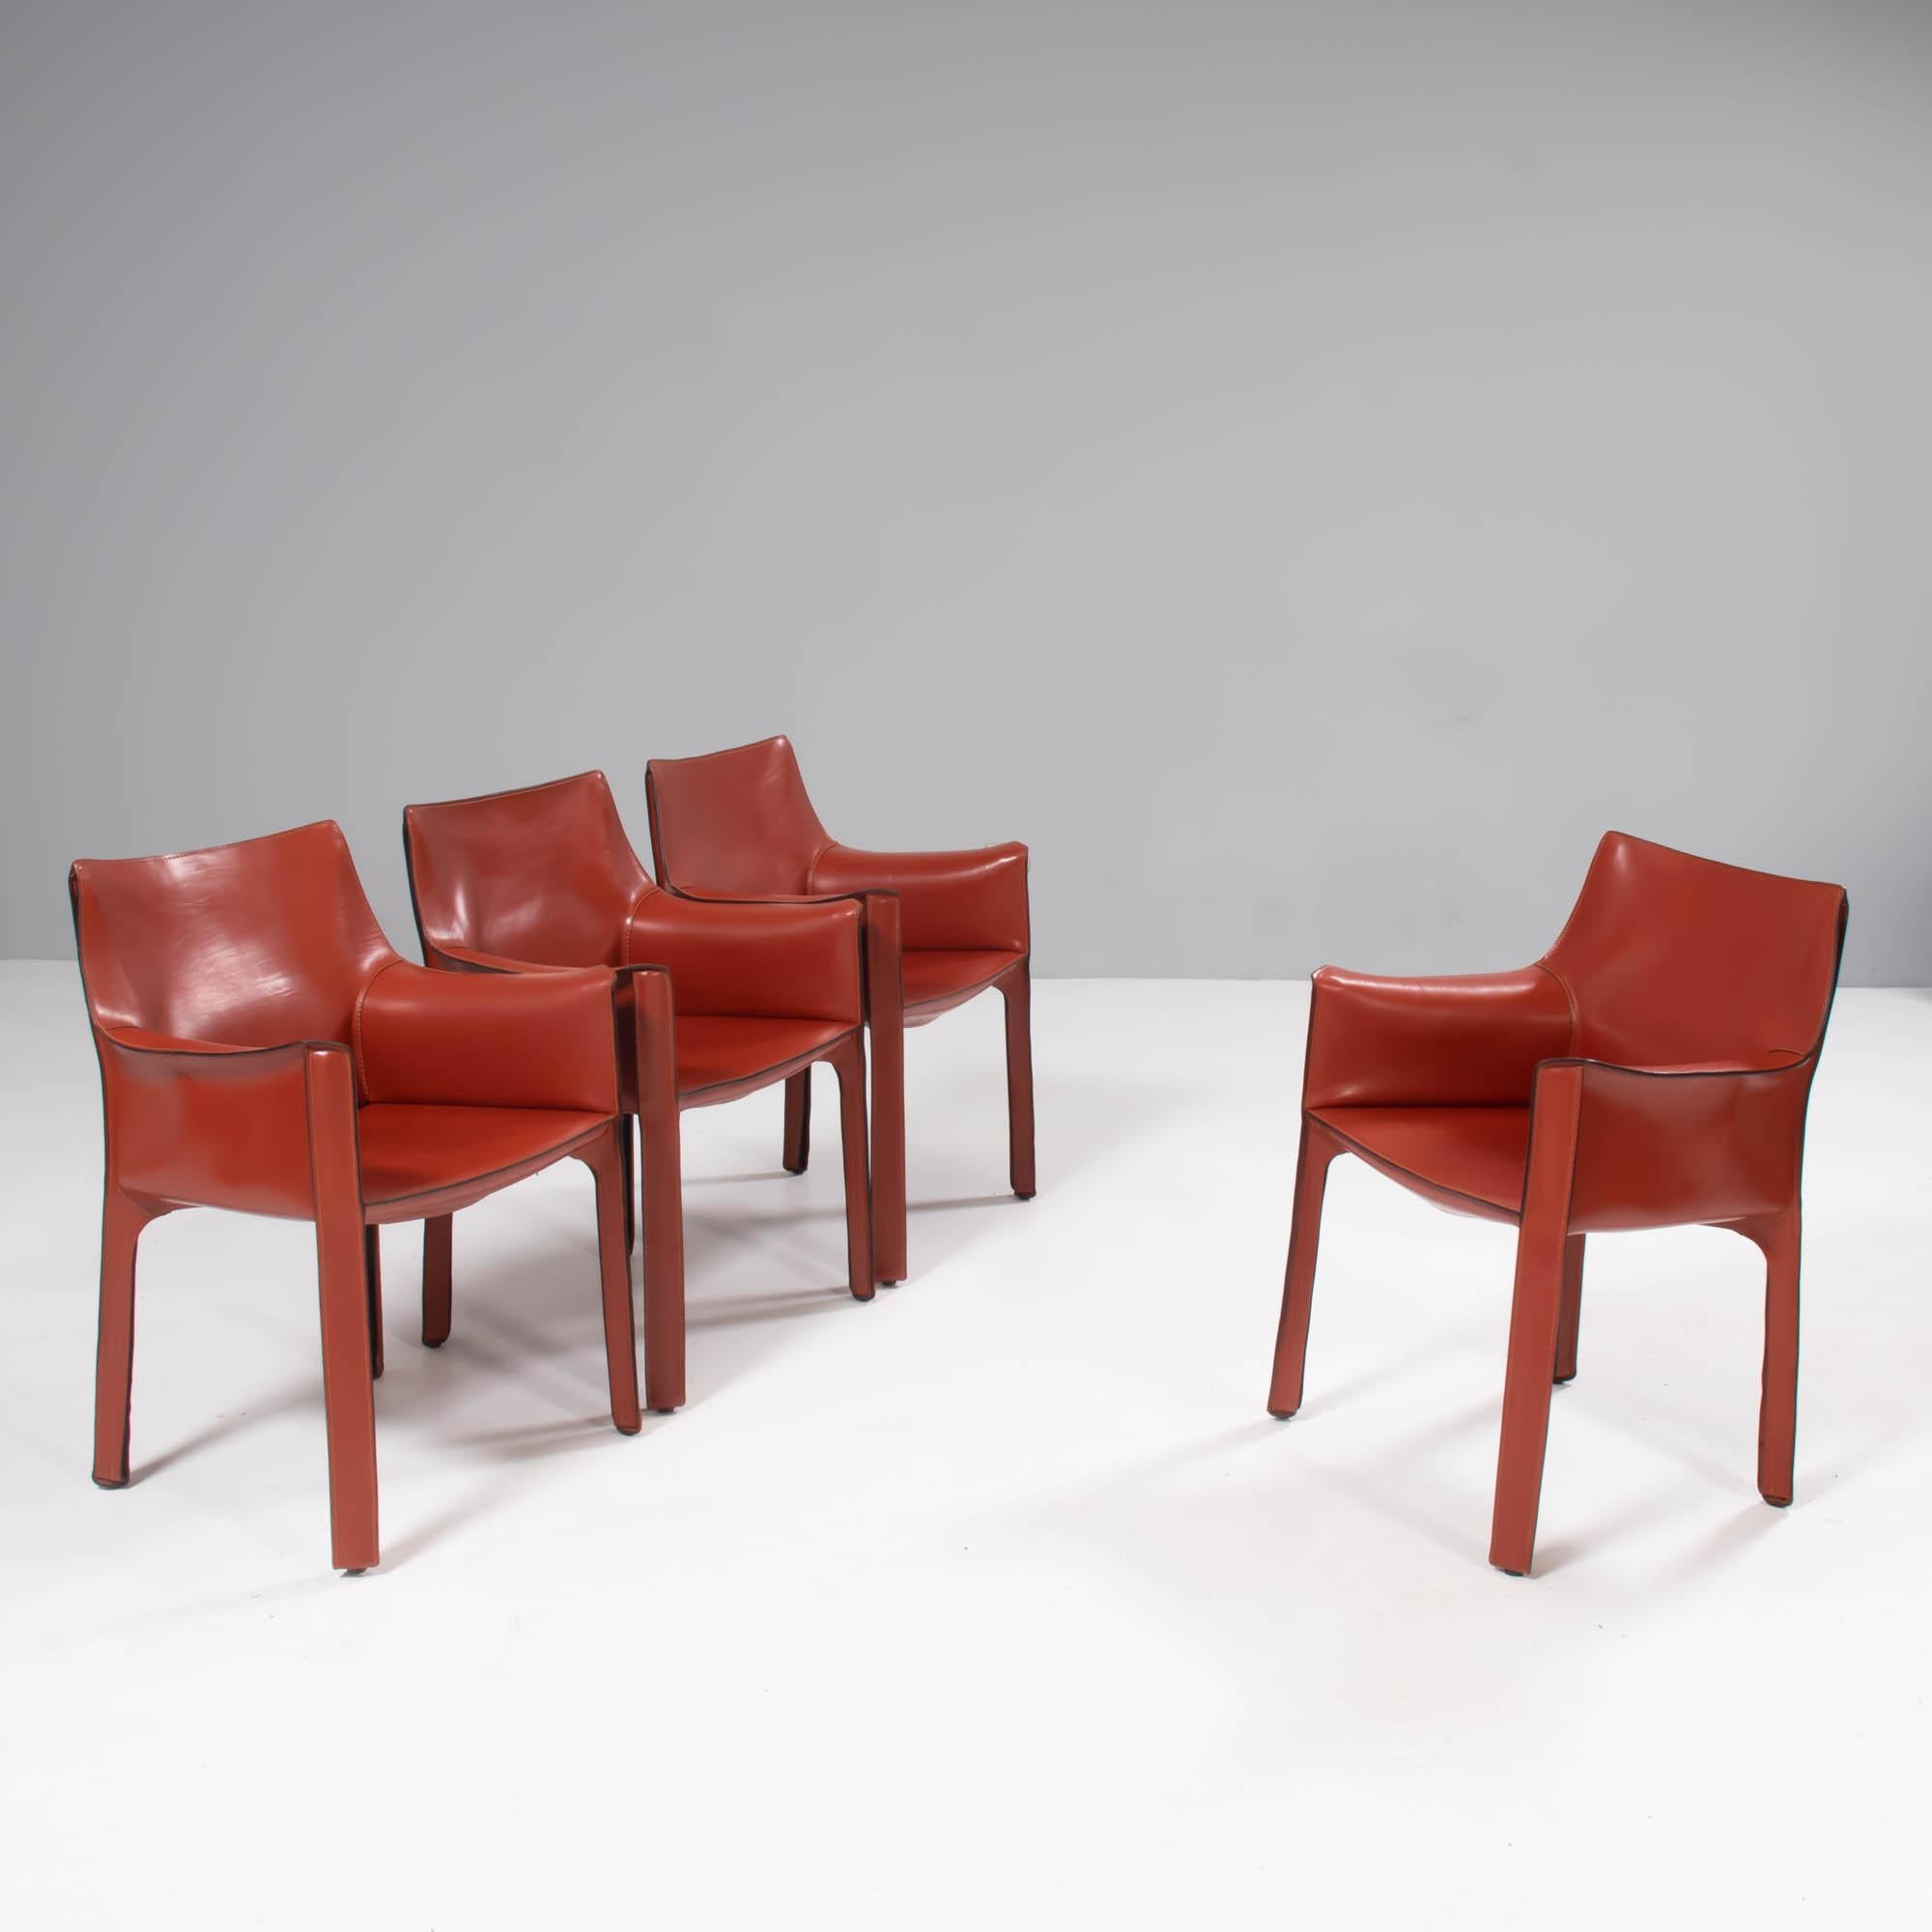 Italian Cassina by Mario Bellini Cab 413 Red Leather Chairs, Set of 4